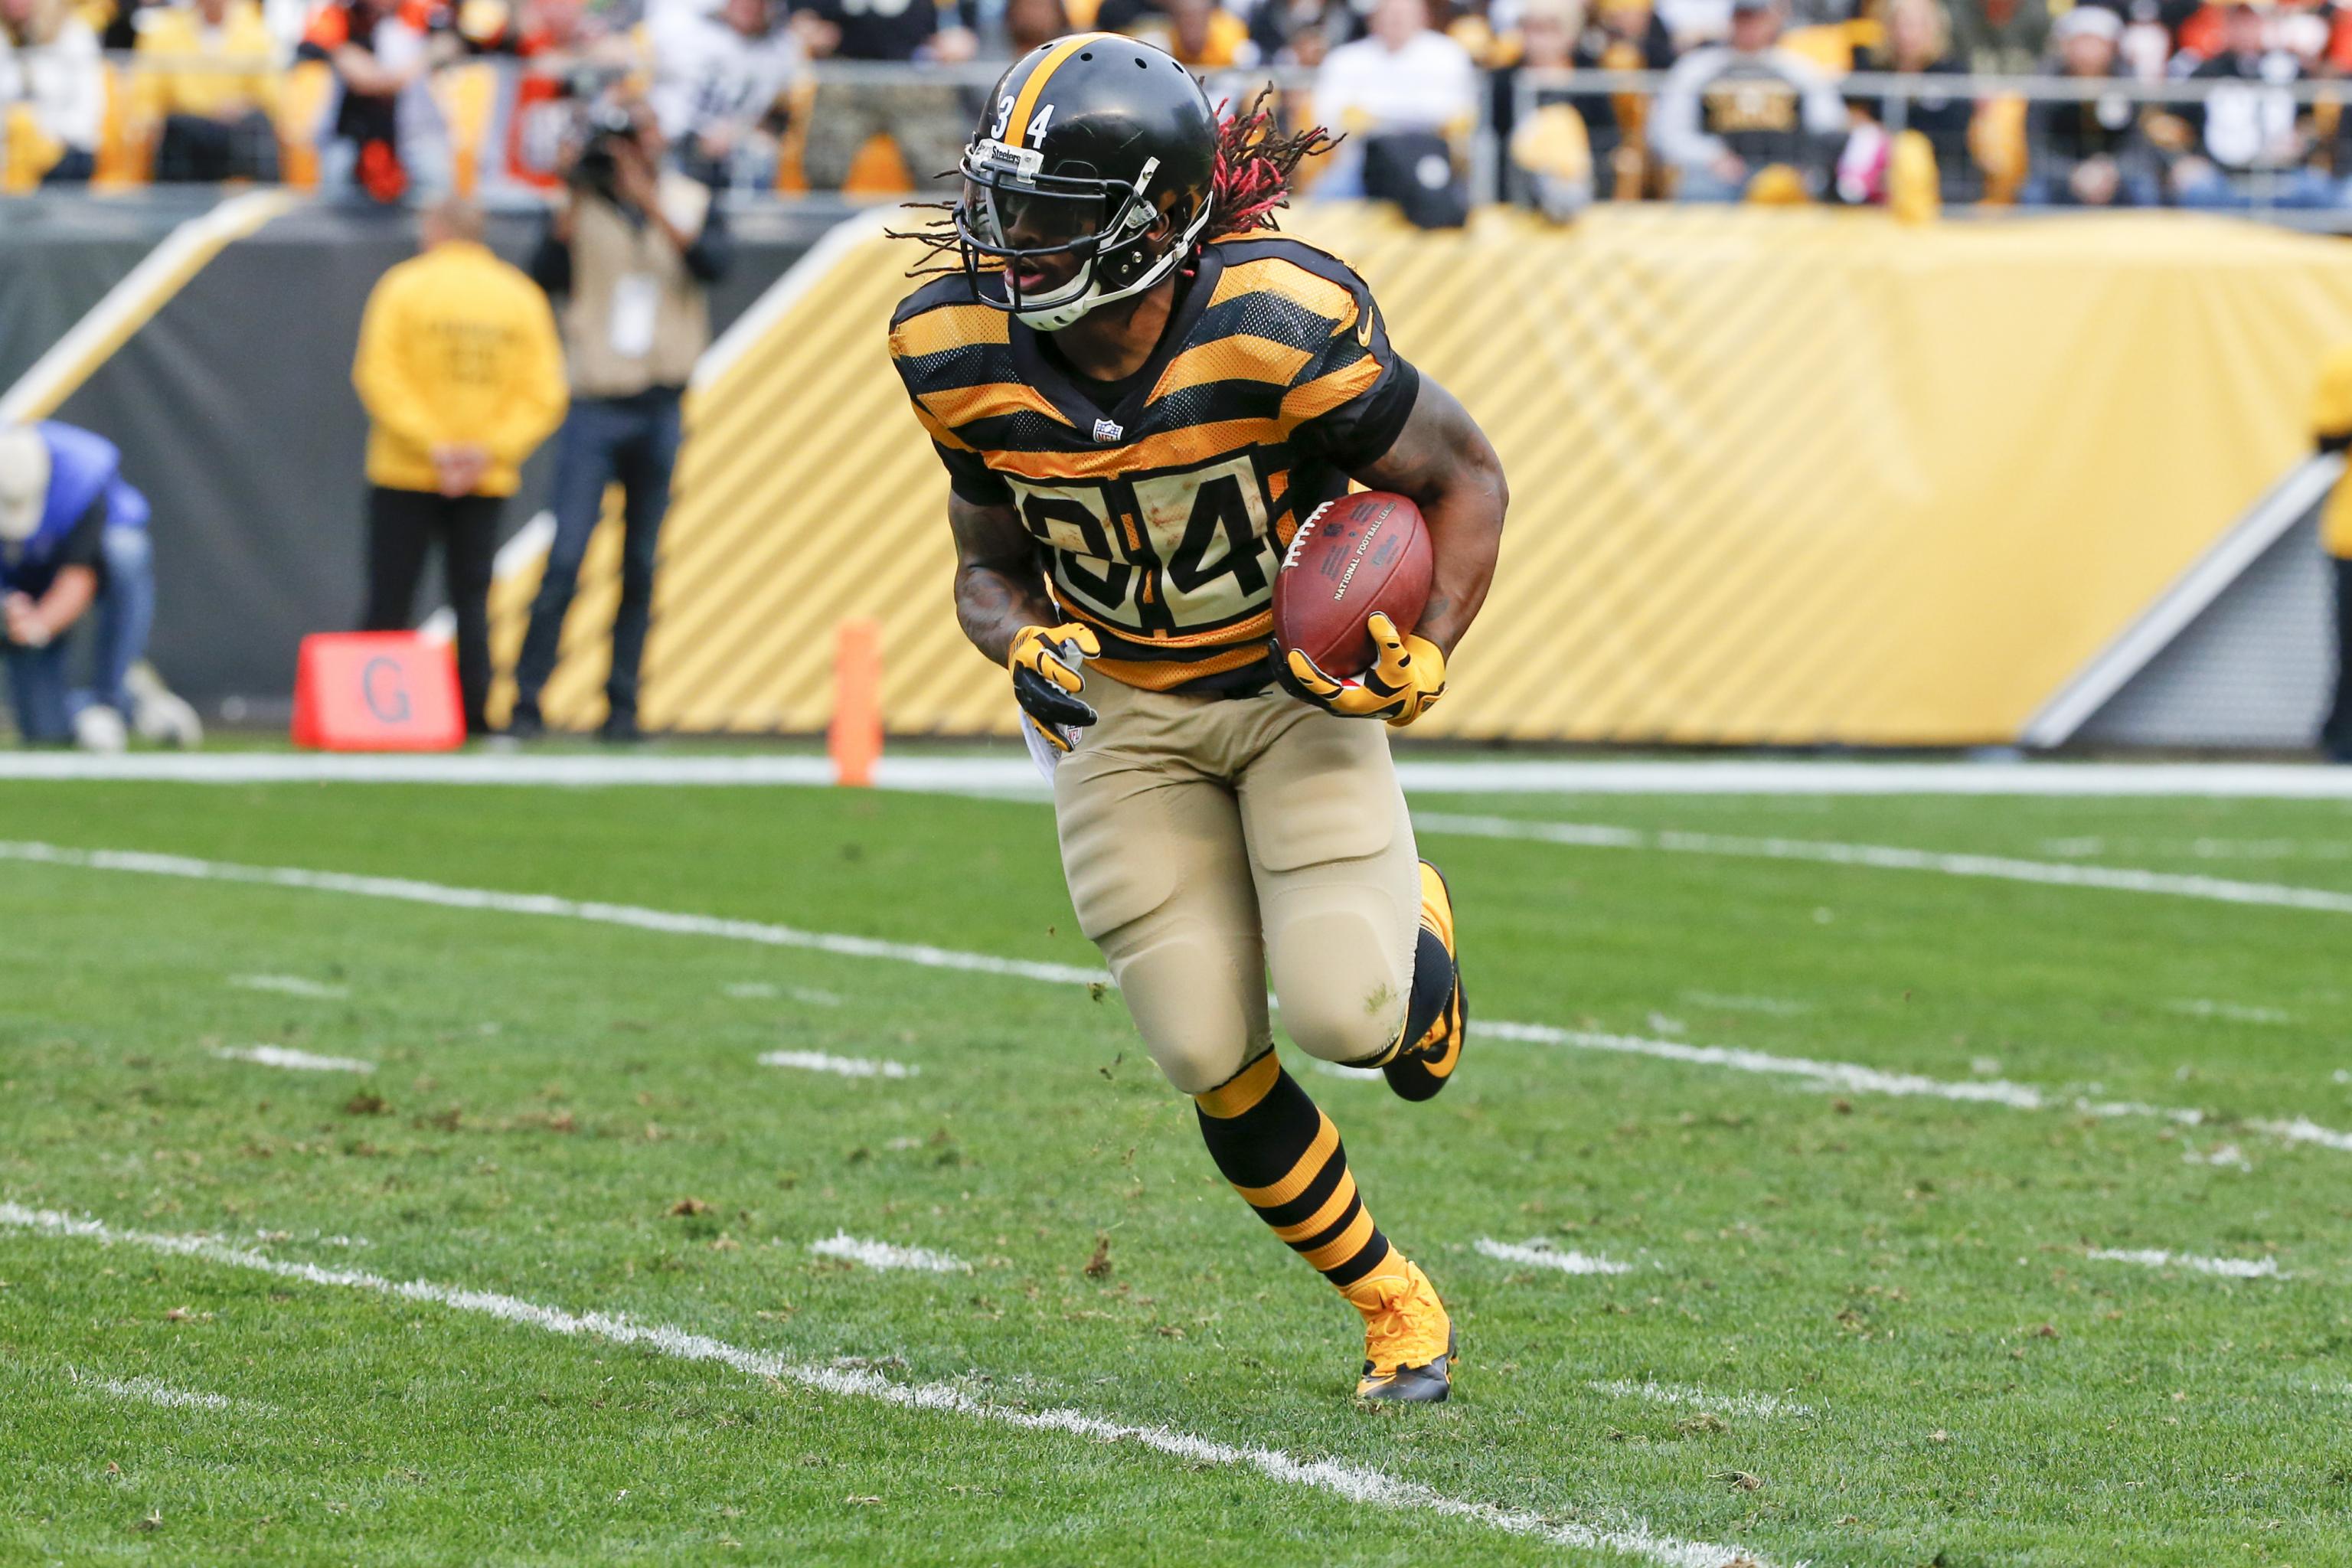 DeAngelo Williams Injury: Updates on Steelers RB's Ankle and